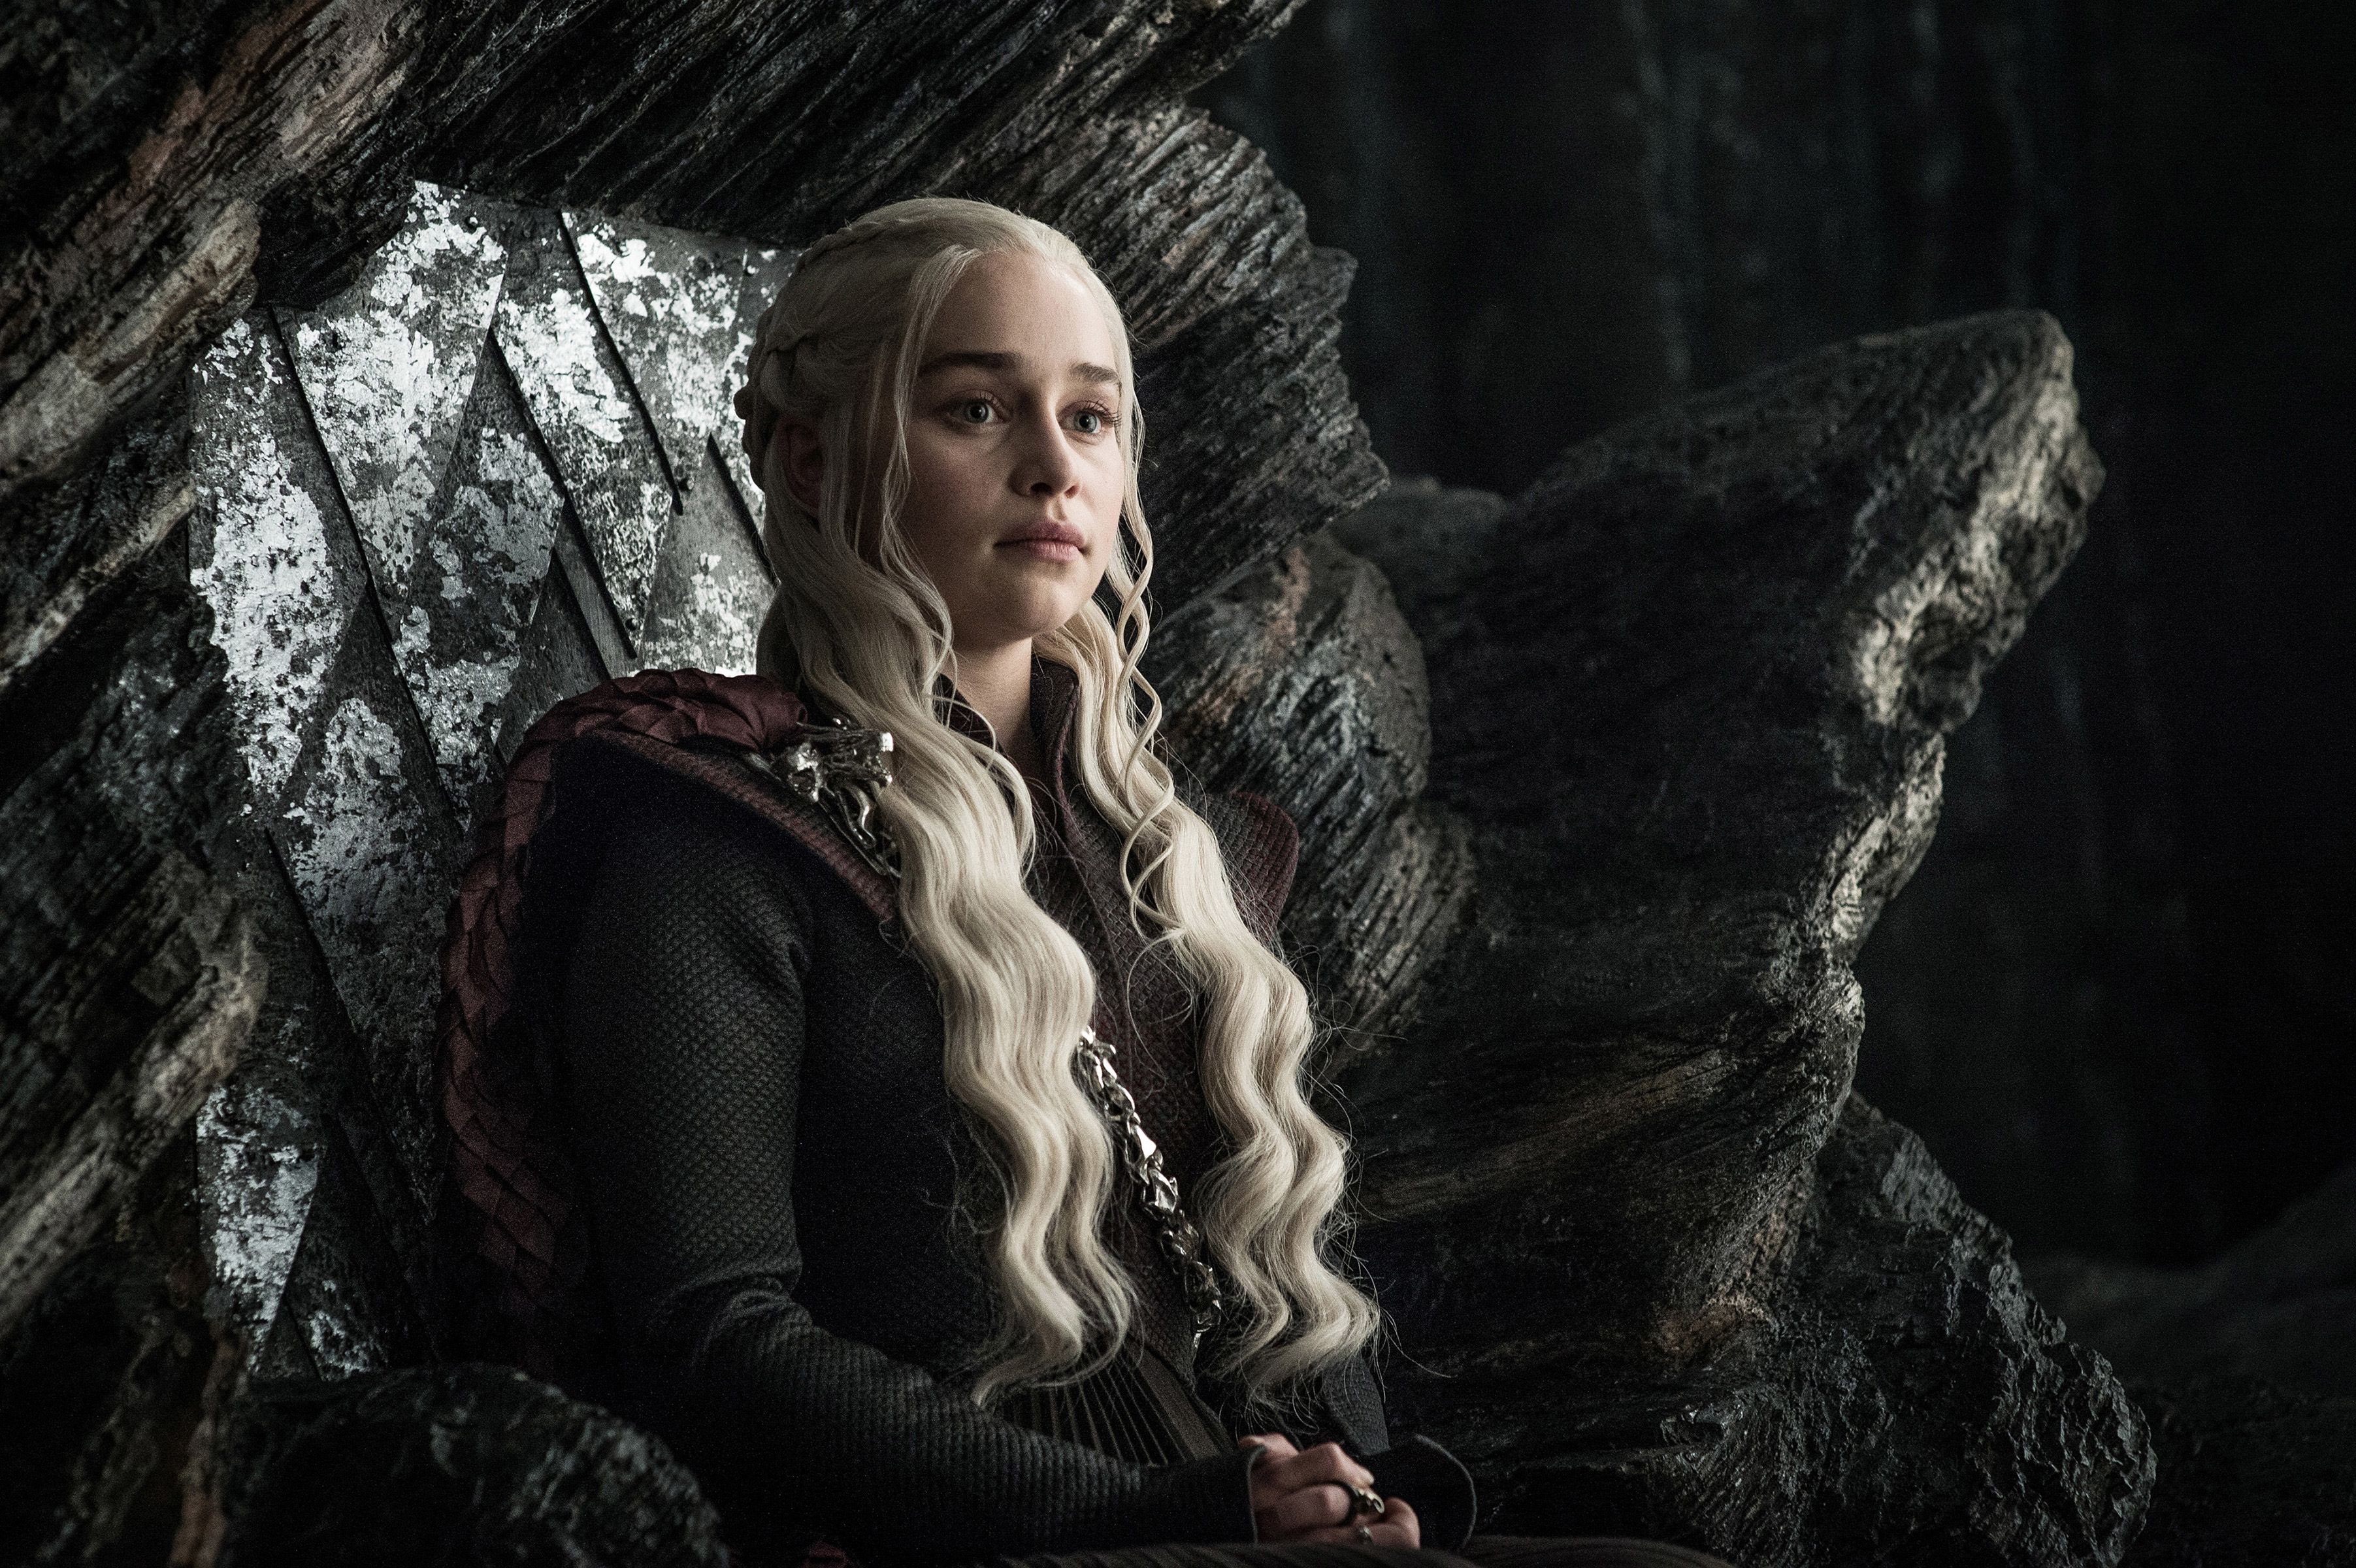 Everything to remember from 'Game of Thrones' Season 1